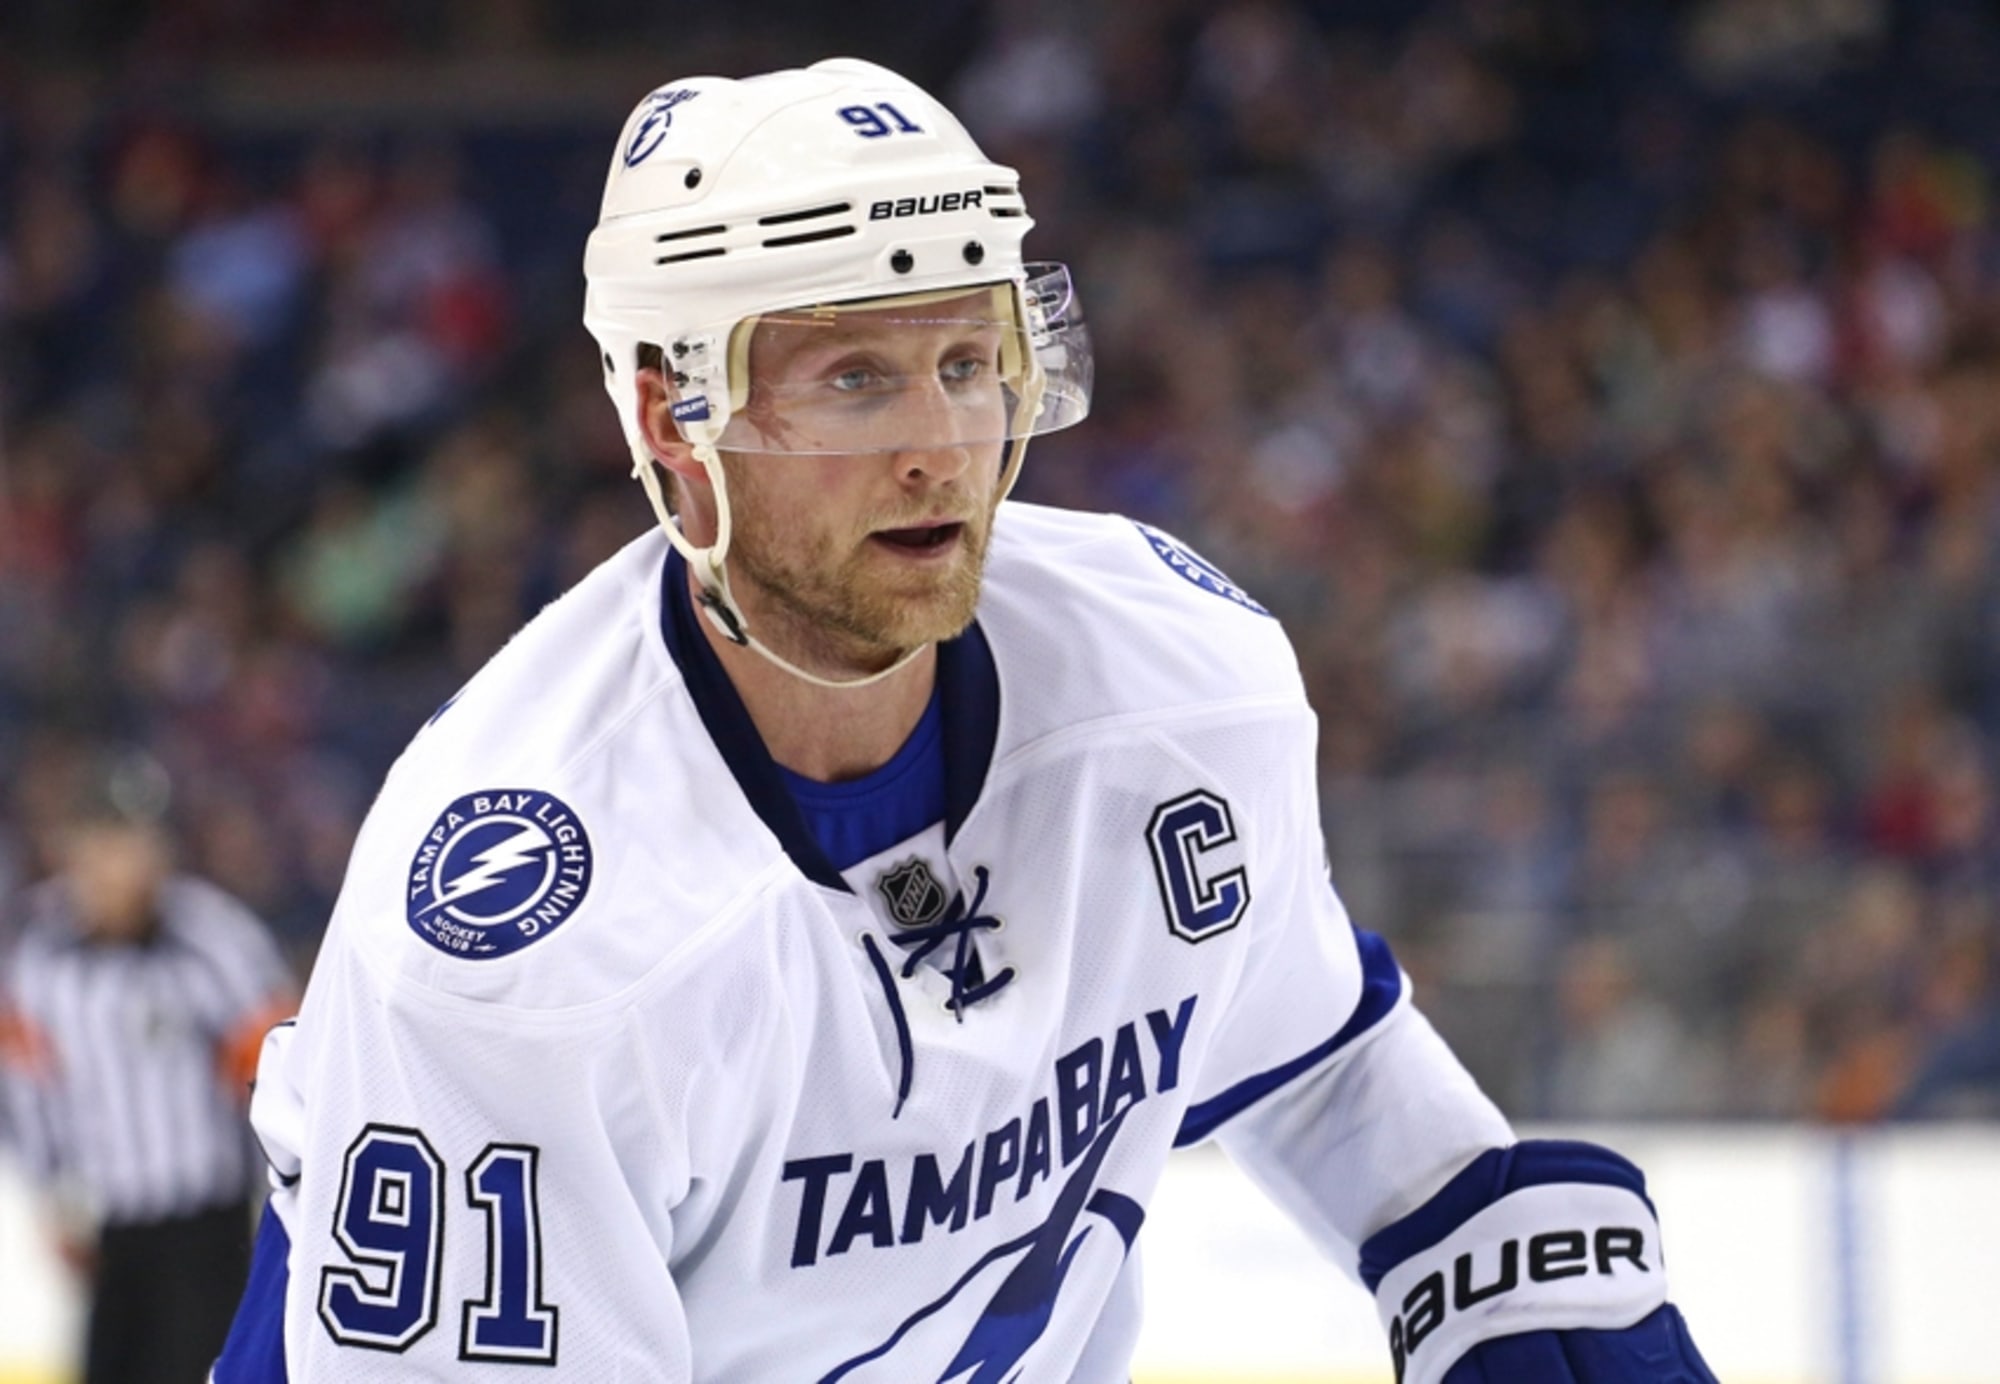 Steven Stamkos Of The Tampa Bay Lightning (And Might I Add He